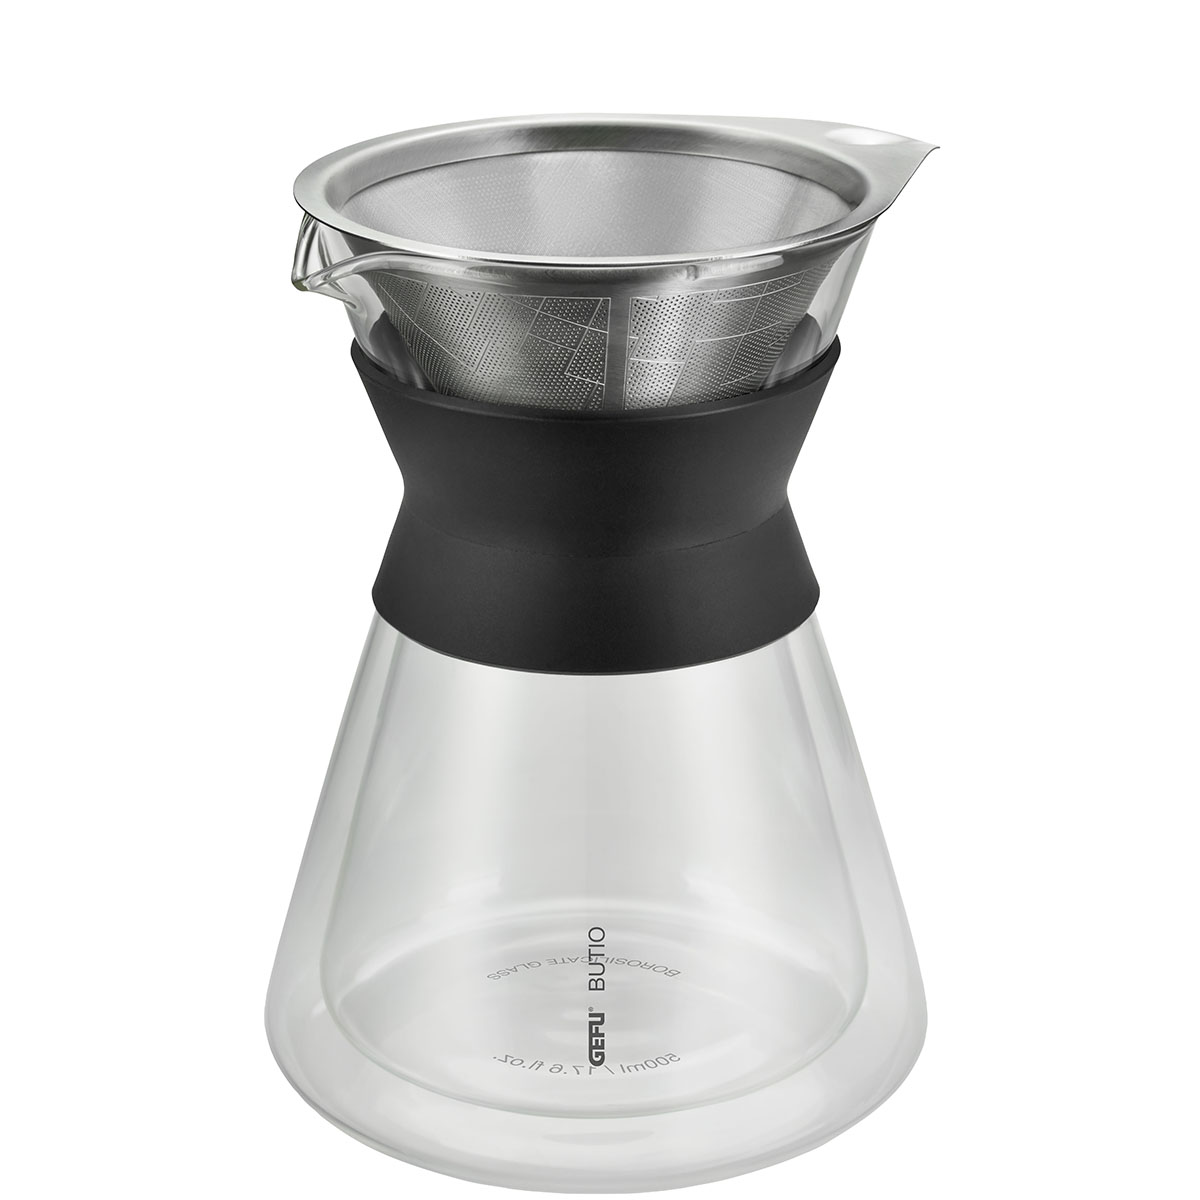 Coffee-maker with filter BUTIO THERMO, 500 ml